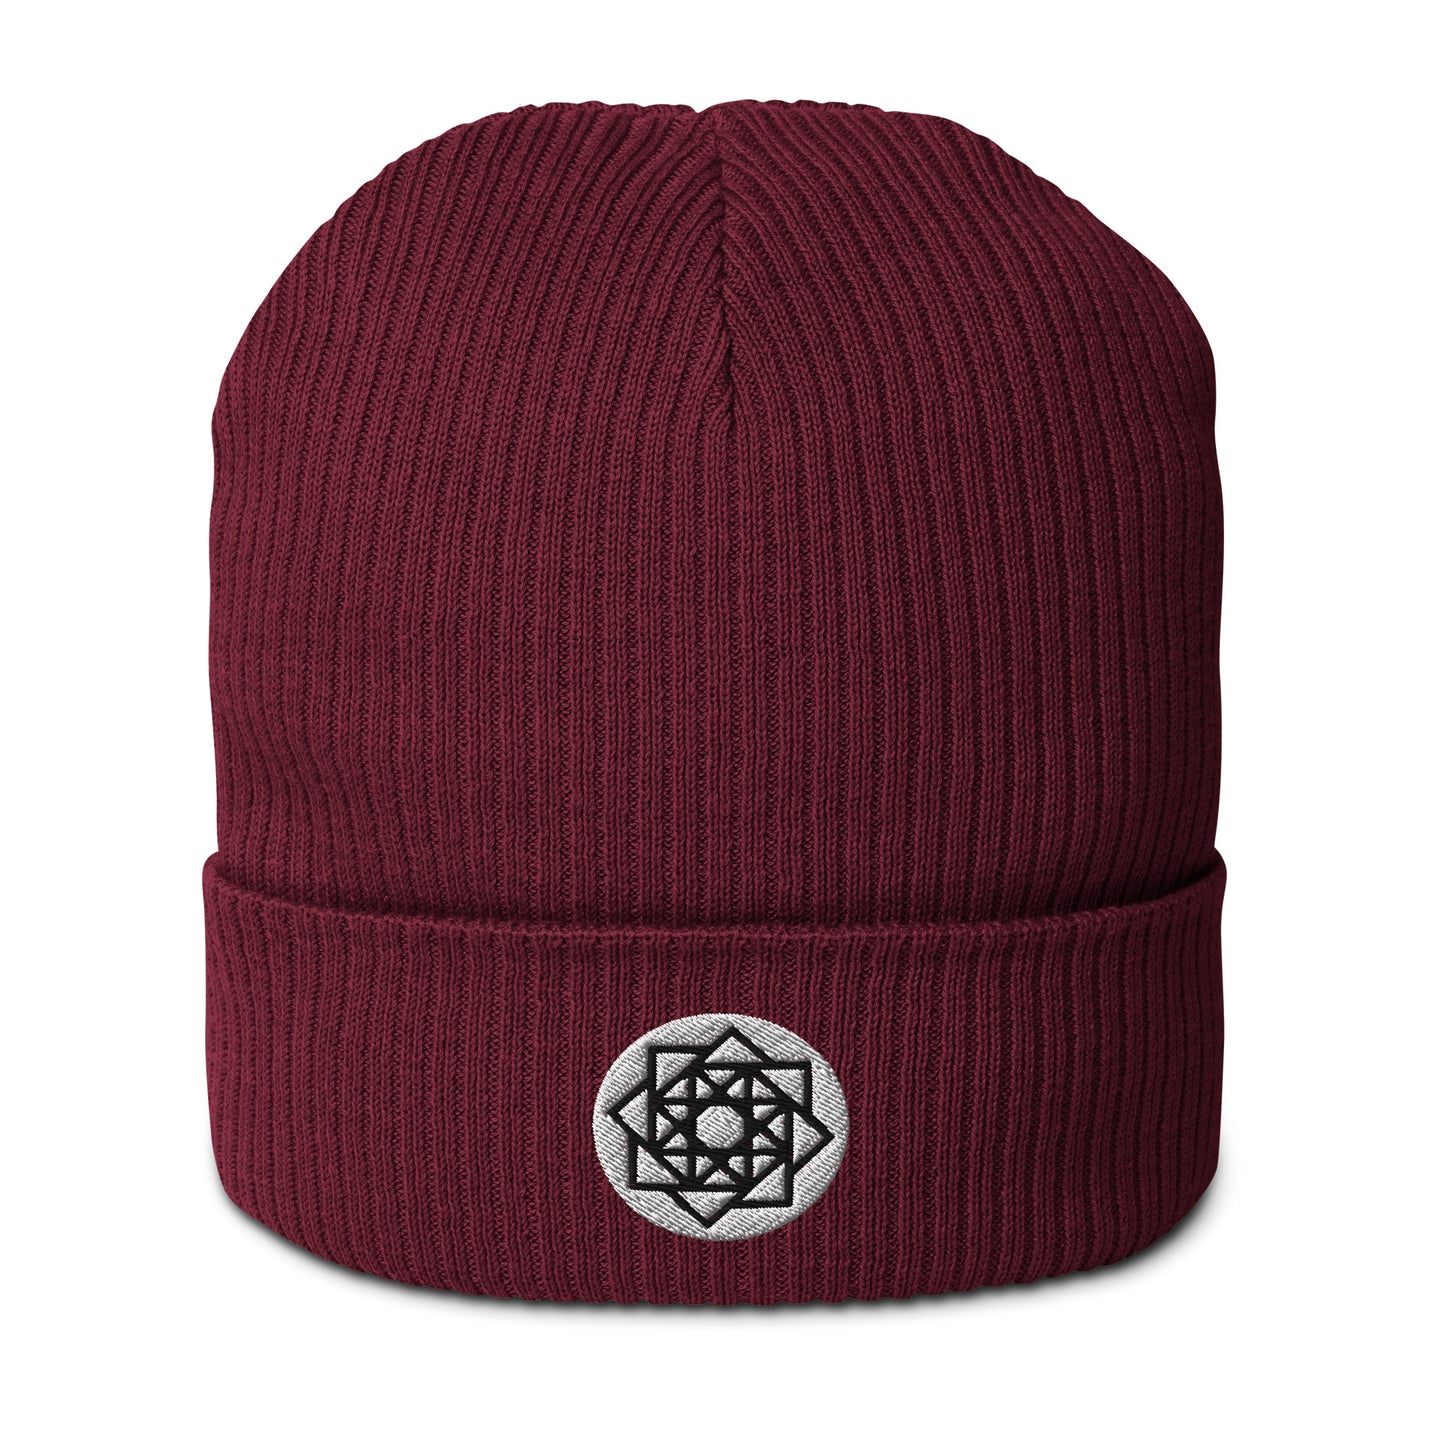 Allow me to introduce our Square Matrix Beanie in Wine Red, a testament to cosmic order and mathematical elegance. Woven from the finest organic cotton and adorned with the precise geometry of the Square Matrix symbol, this beanie transcends mere headwear.